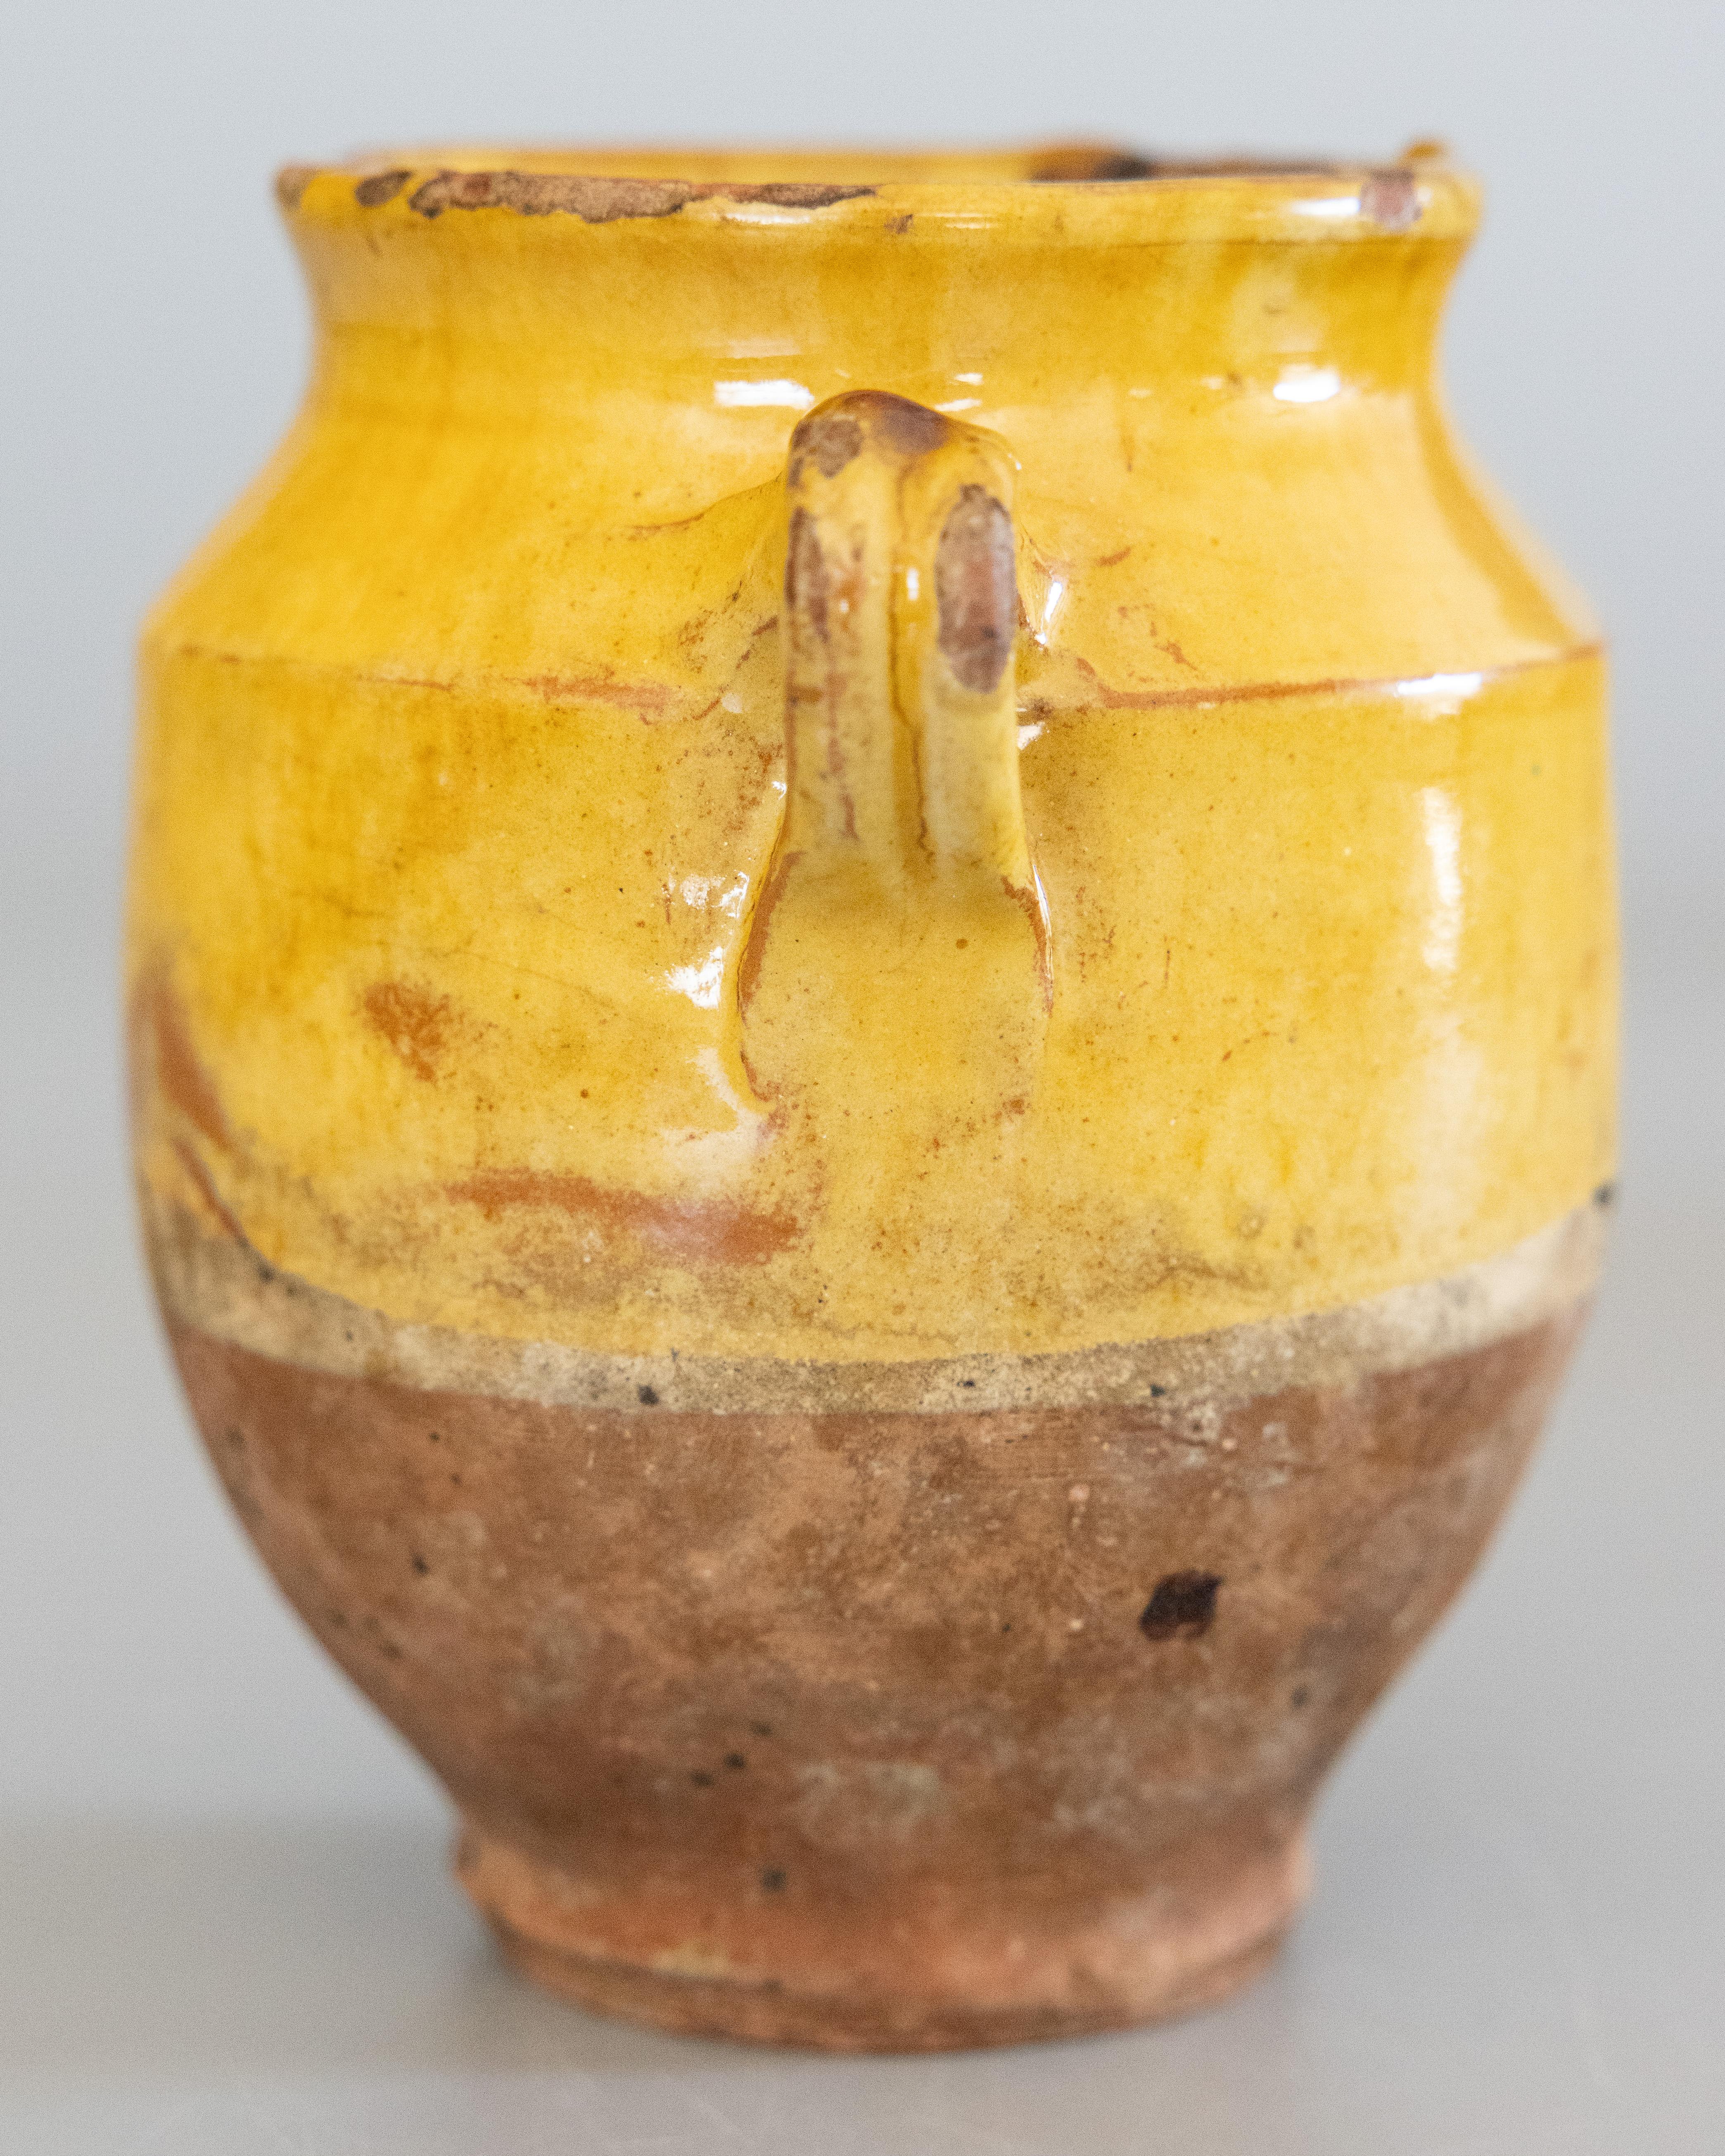 A lovely 19th century petite French confit pot with yellow glaze from the South of France, Castelnaudary. This pot or planter is hand thrown with charming handles known as 'ears'. These jars were used for storing and preserving cooked meat. This one